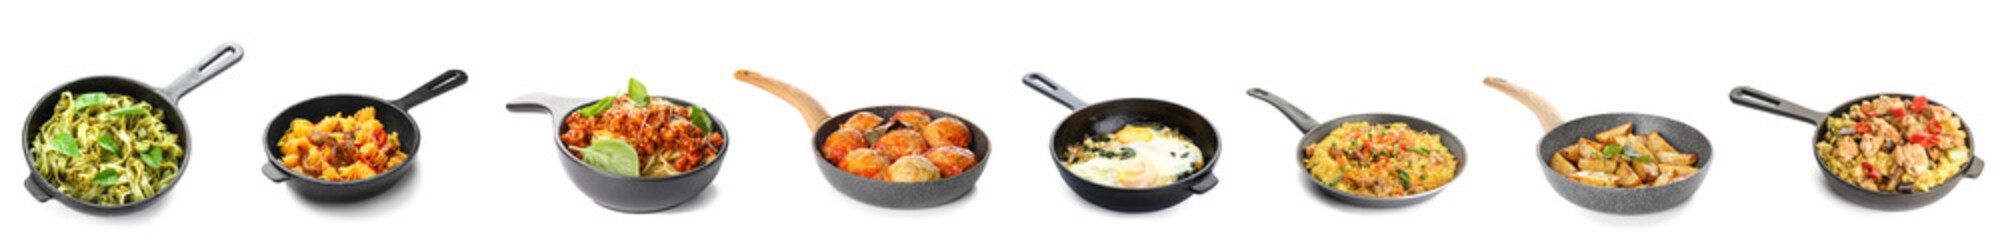 Set of frying pans with tasty cooked dishes on white background